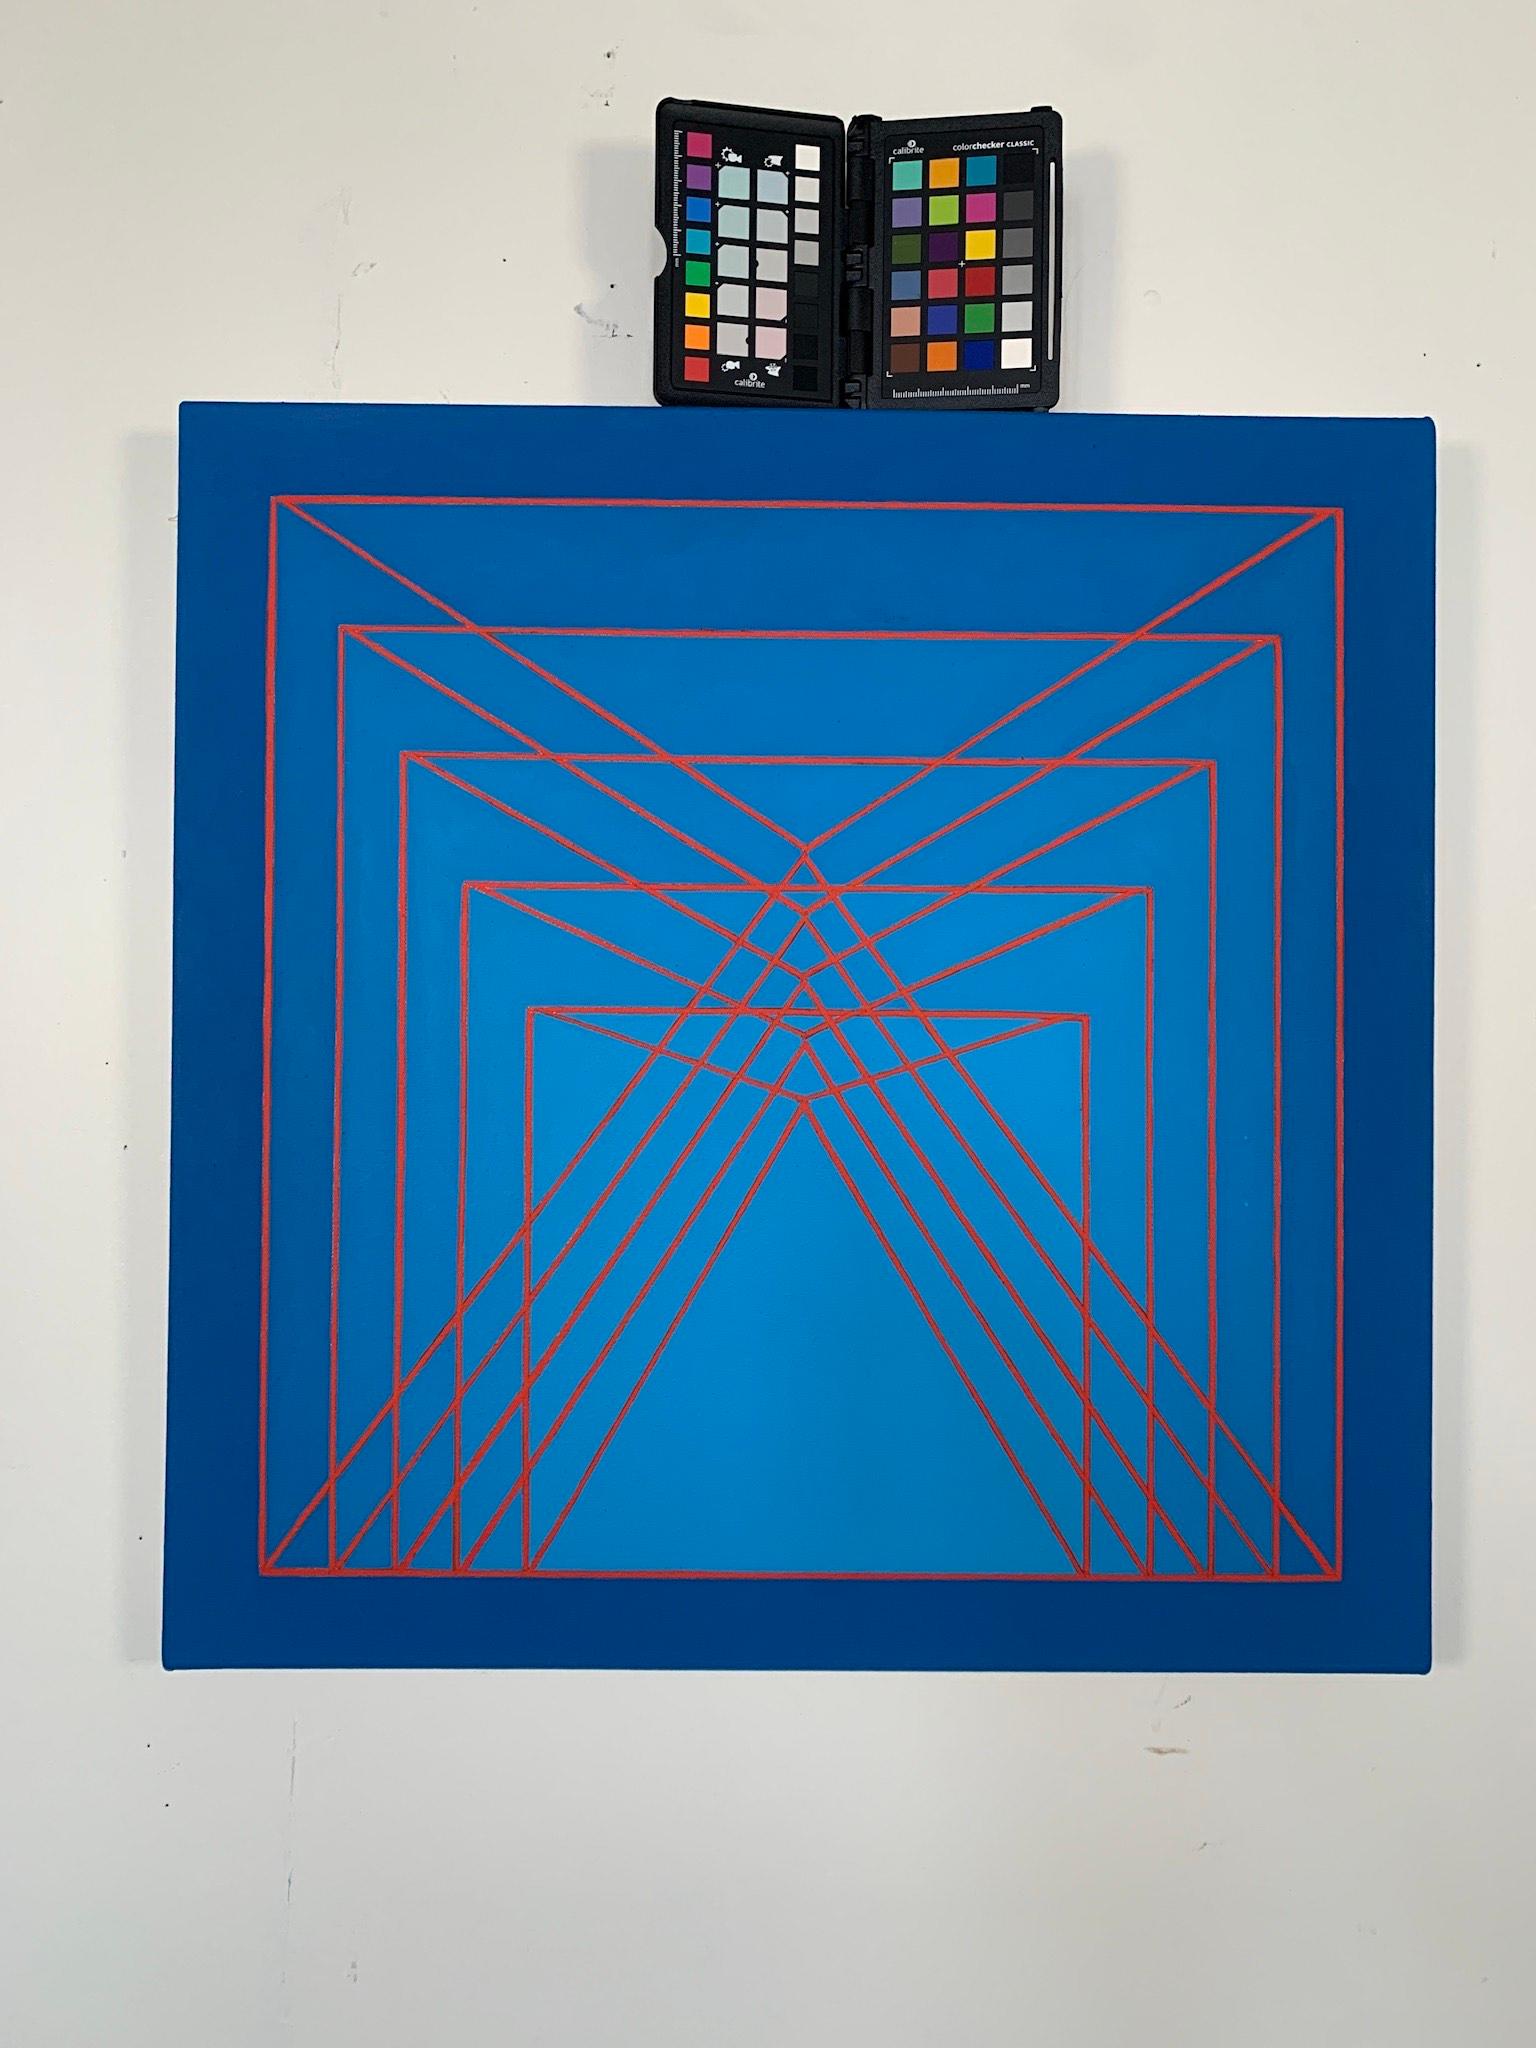 Benjamin Weaver creates spatial tension through his use of contrasting colors arranged in a geometric framework. Imagery and color work both with and against each other to create movement within the composition. By the artist’s careful placement of